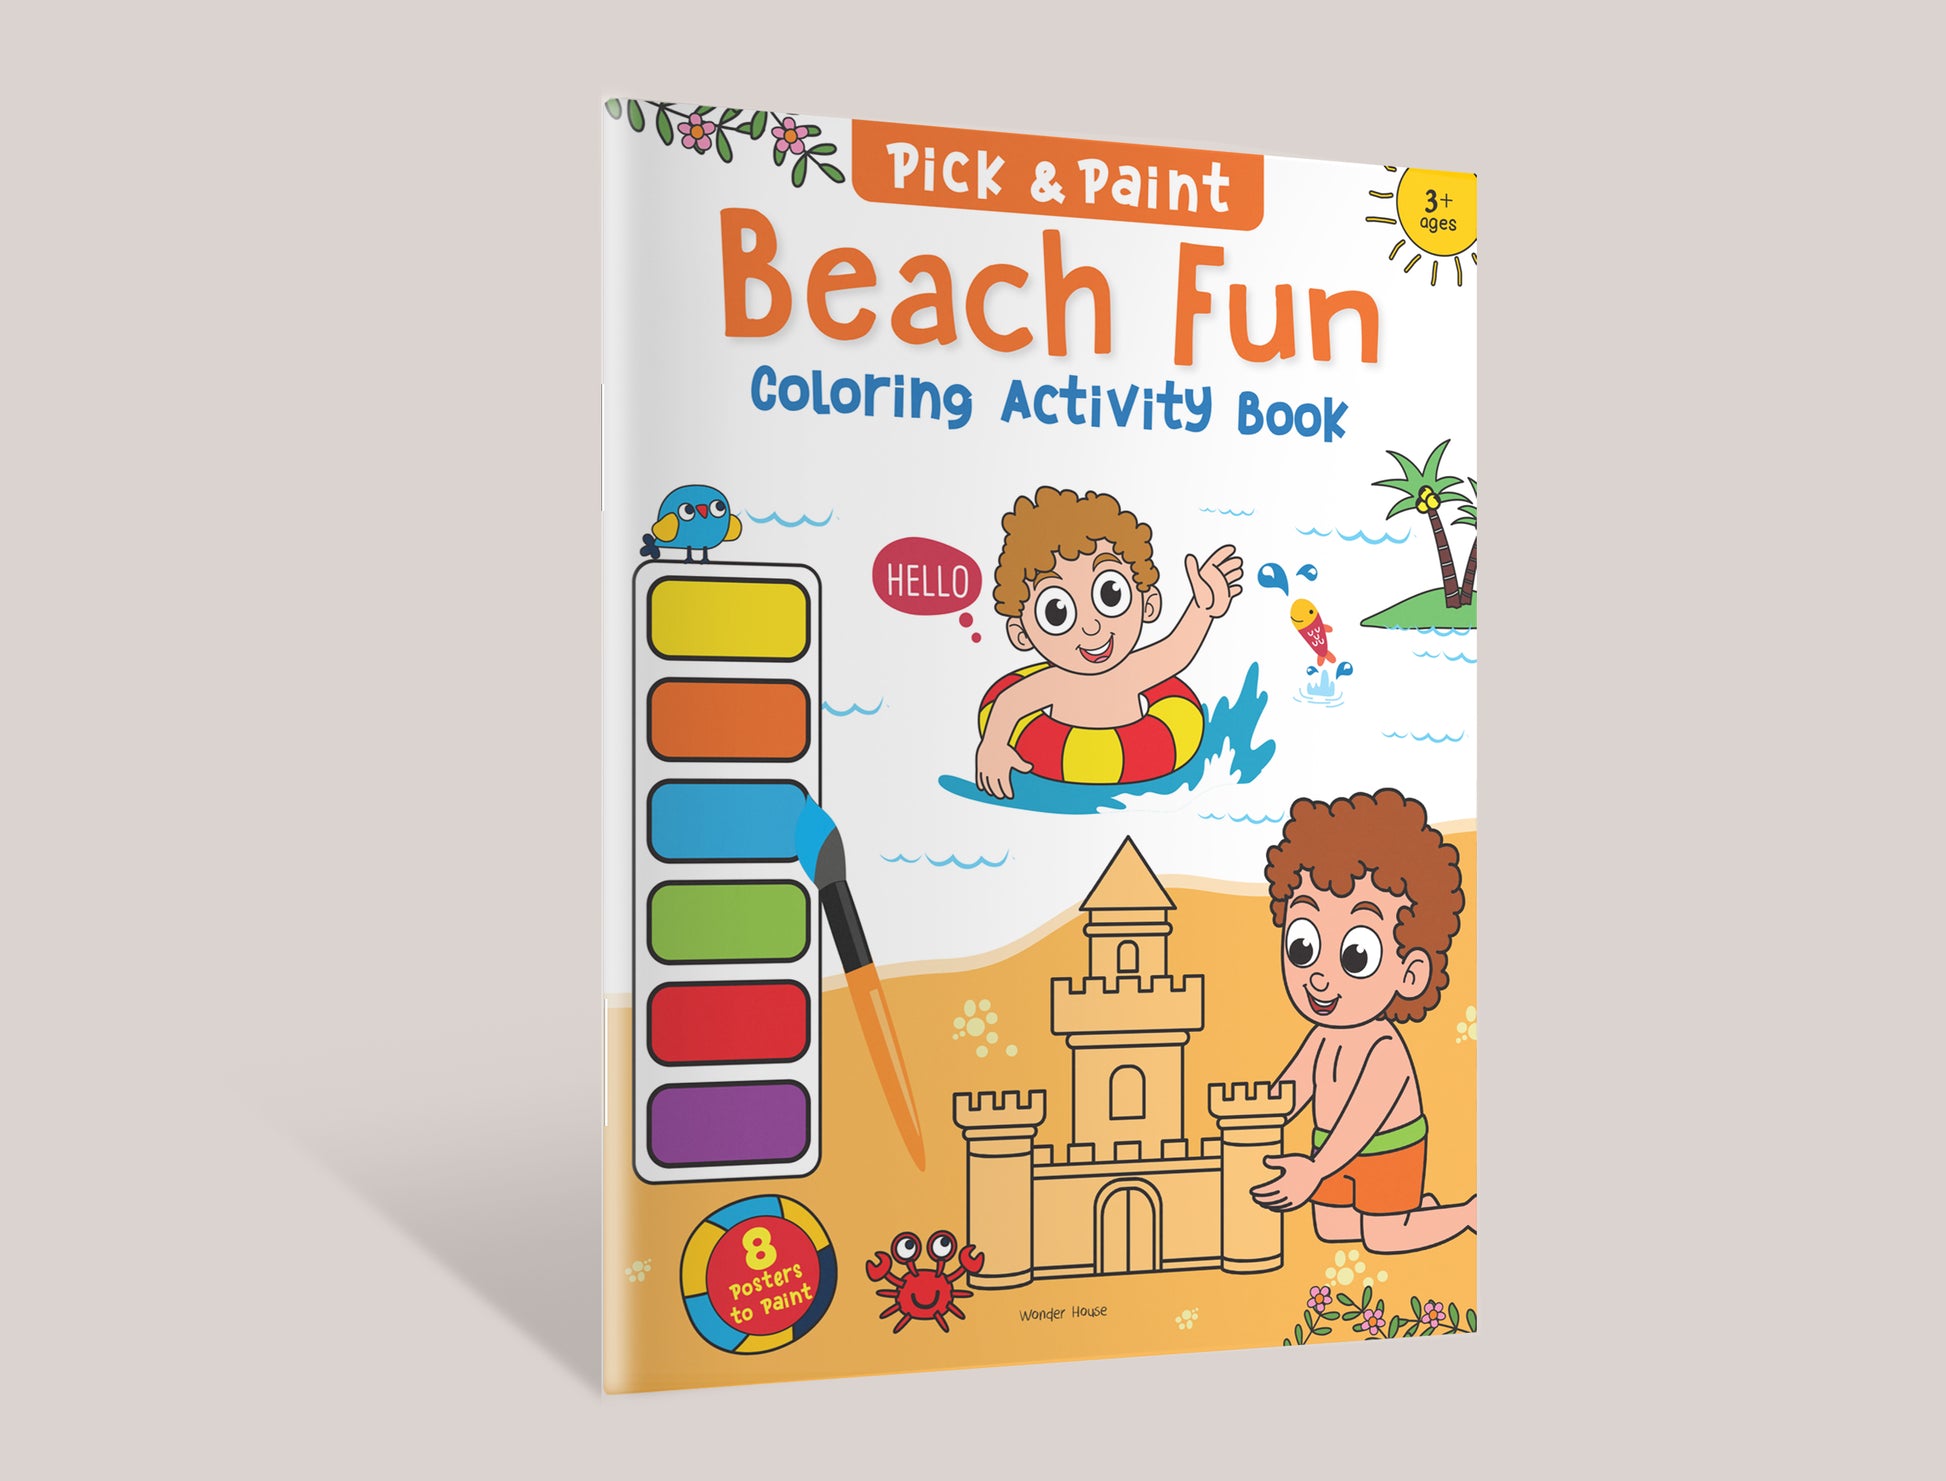 Pick and Paint Coloring Activity Book For Kids: Beach fun